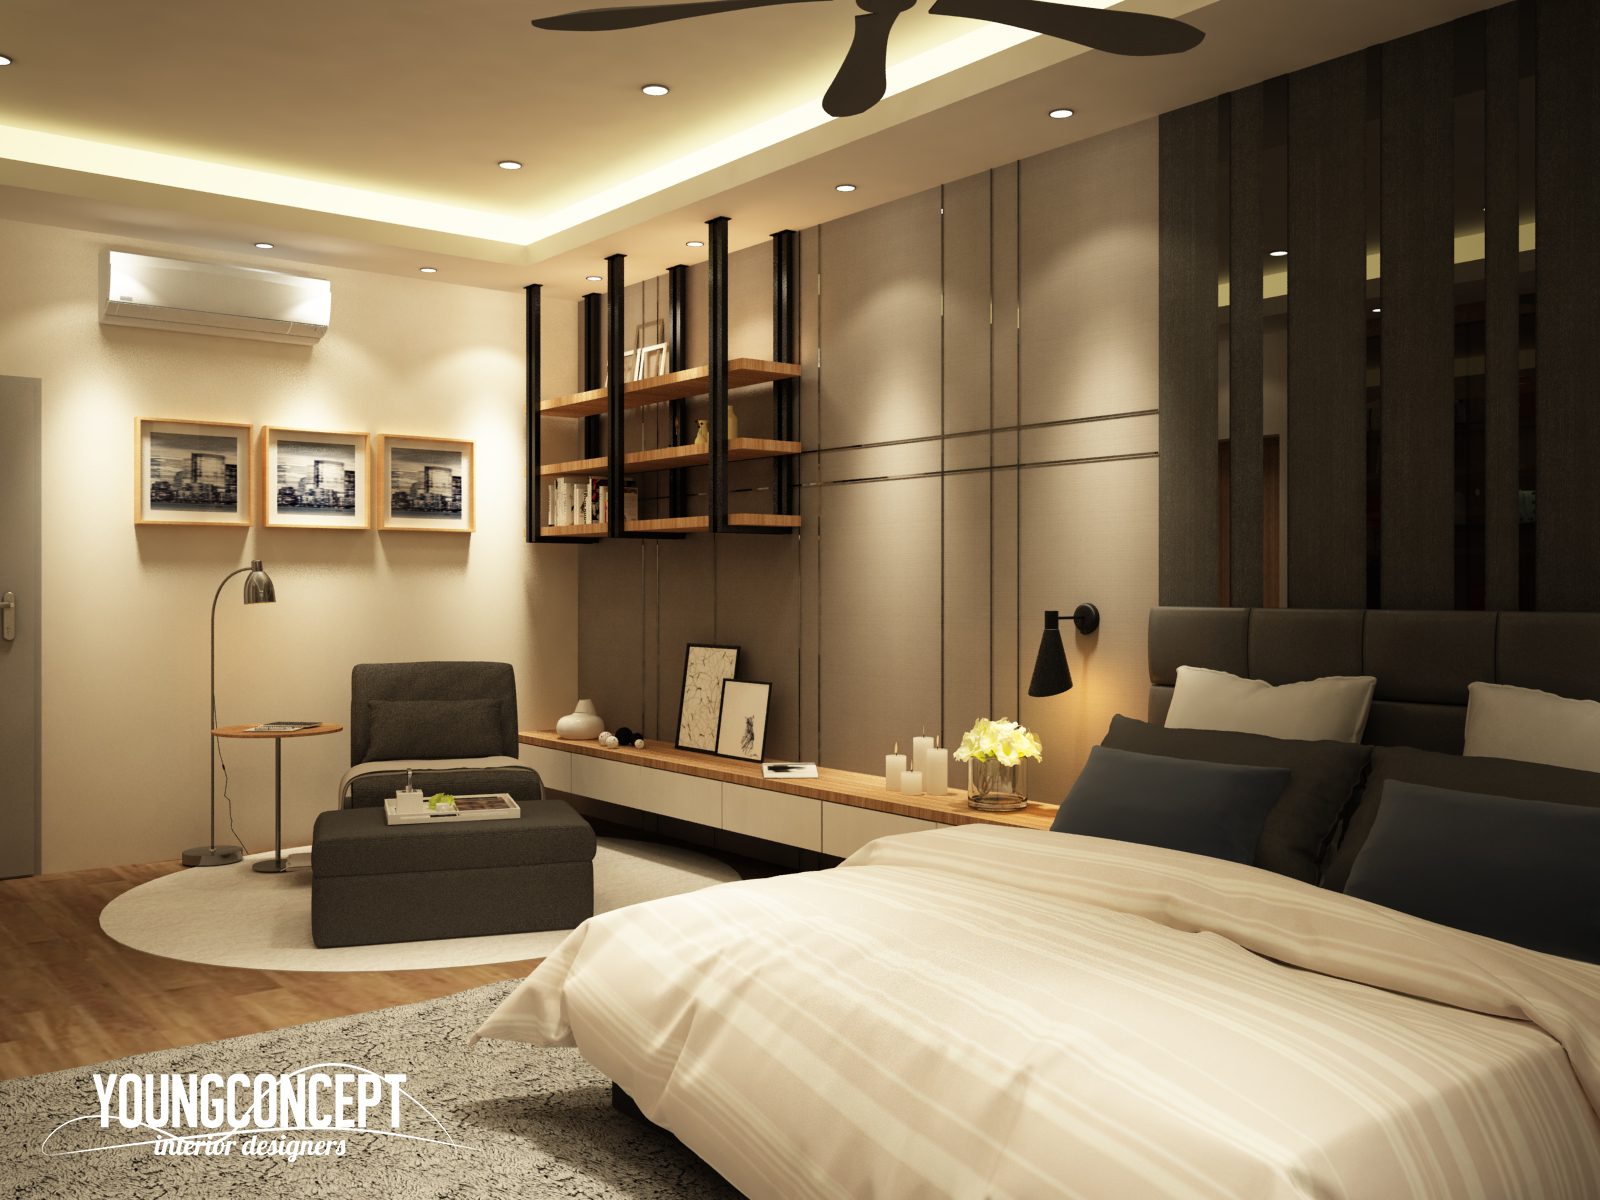 Bedroom with reading area and suspended shelving for this semi-detached house in Taman Segar, Cheras